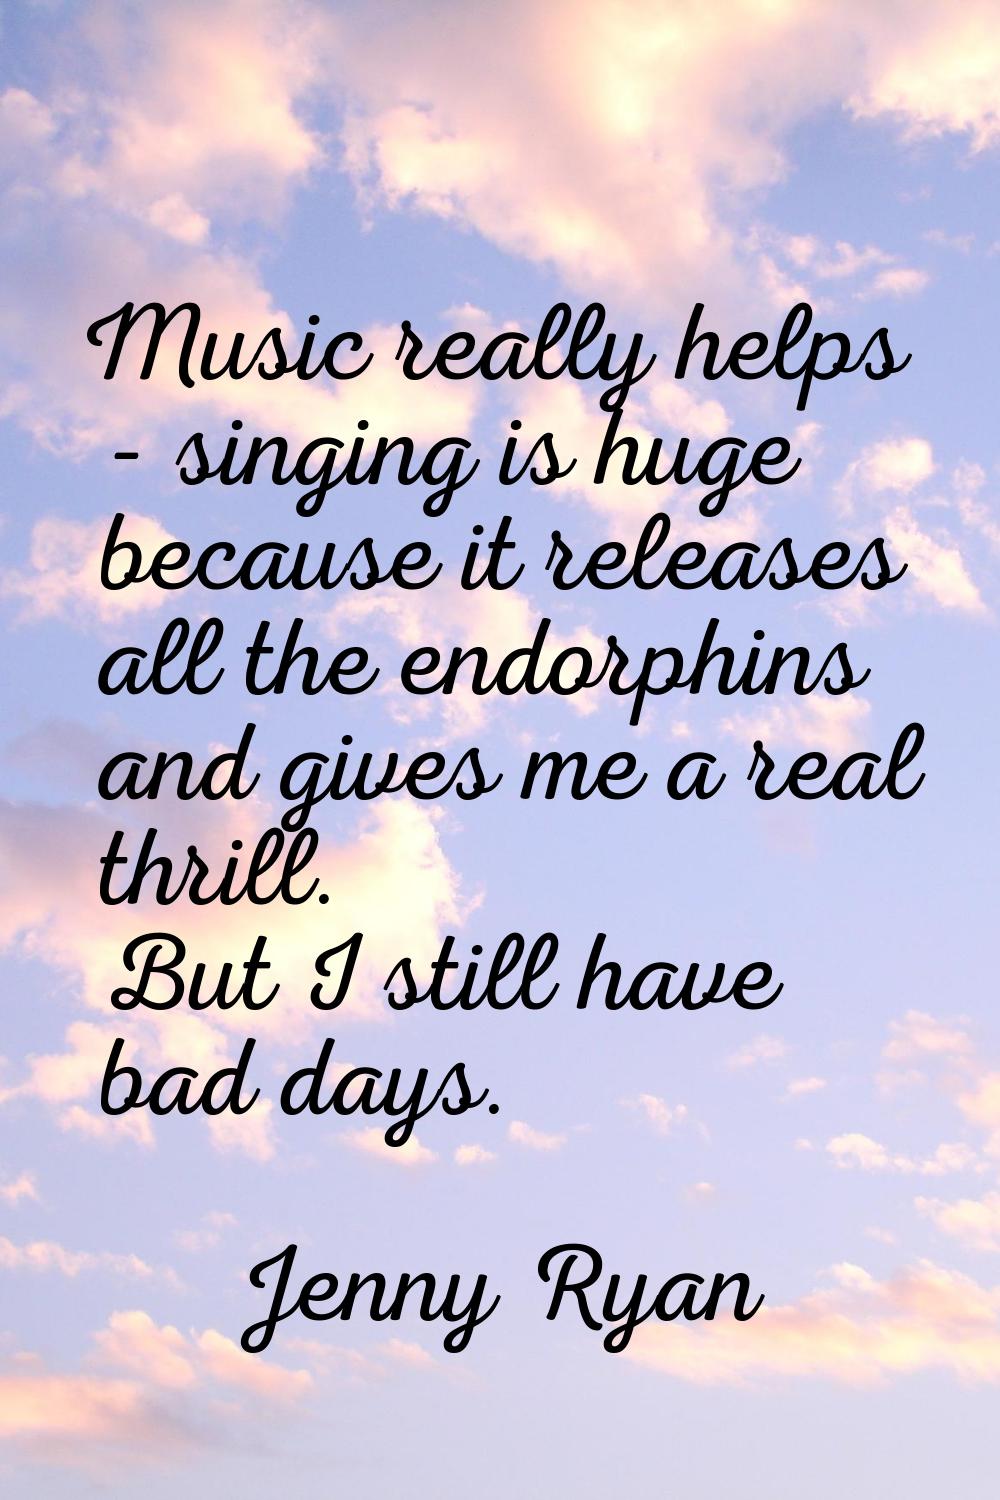 Music really helps - singing is huge because it releases all the endorphins and gives me a real thr